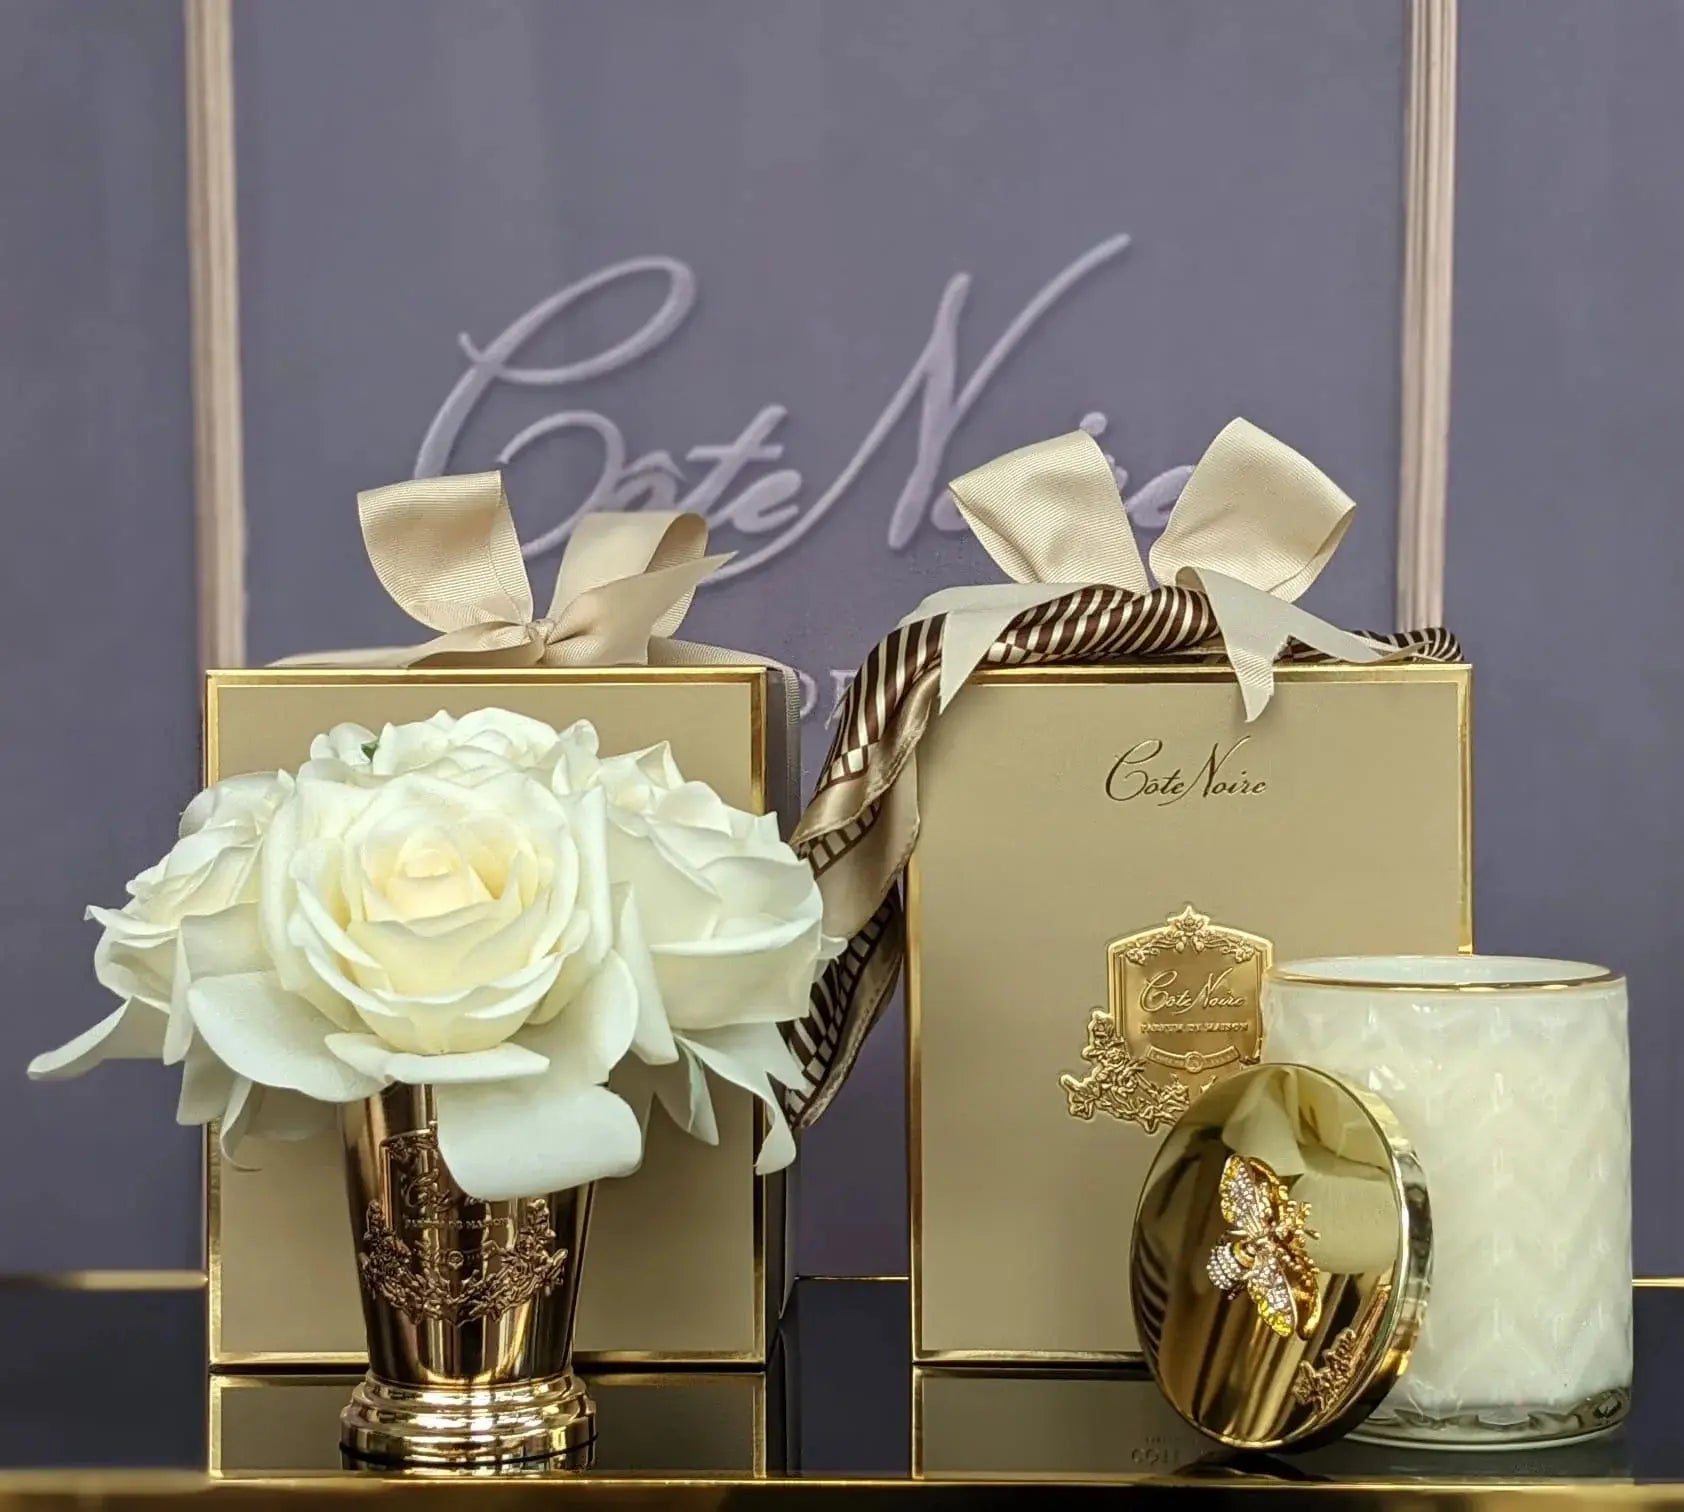 A Cote Noire luxury gift set featuring a champagne gold vase filled with white artificial roses, and two elegant gold gift boxes adorned with cream-colored ribbons. One box contains a white textured candle with a gold lid decorated with a jeweled bee. The items are displayed against a sophisticated background with the Cote Noire logo, creating a luxurious and refined presentation.